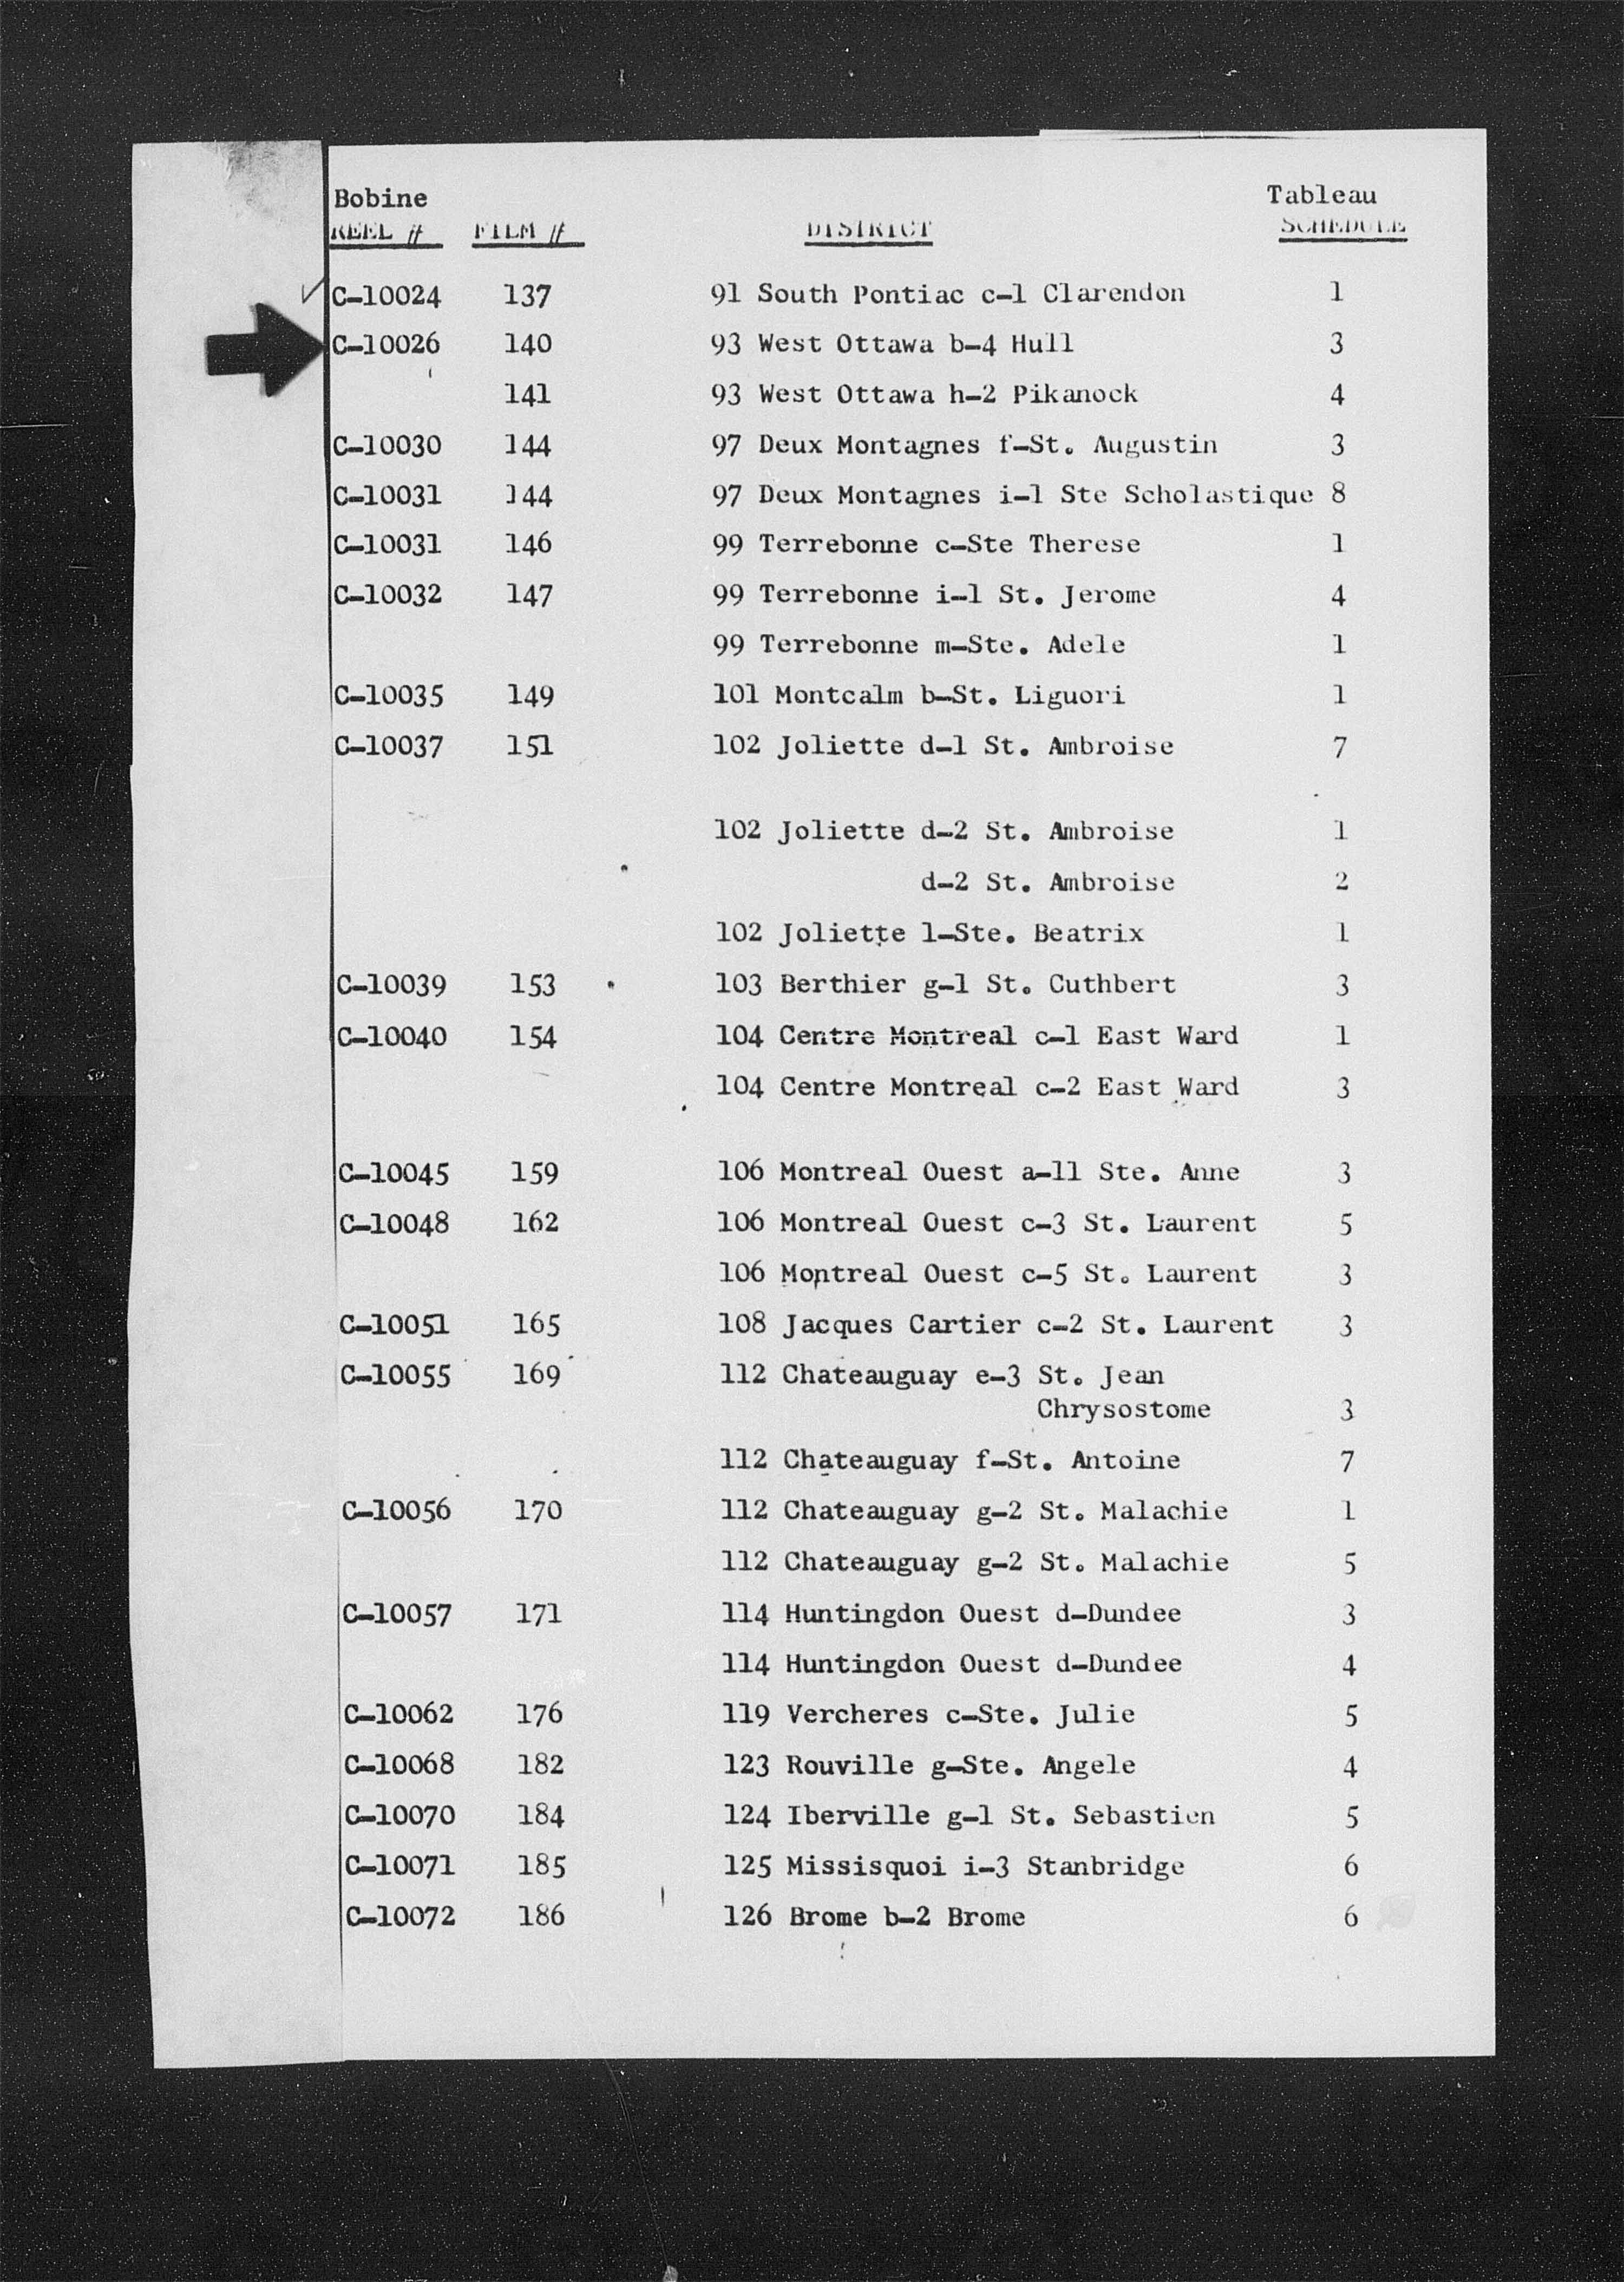 Title: Census of Canada, 1871 - Mikan Number: 142105 - Microform: c-10026